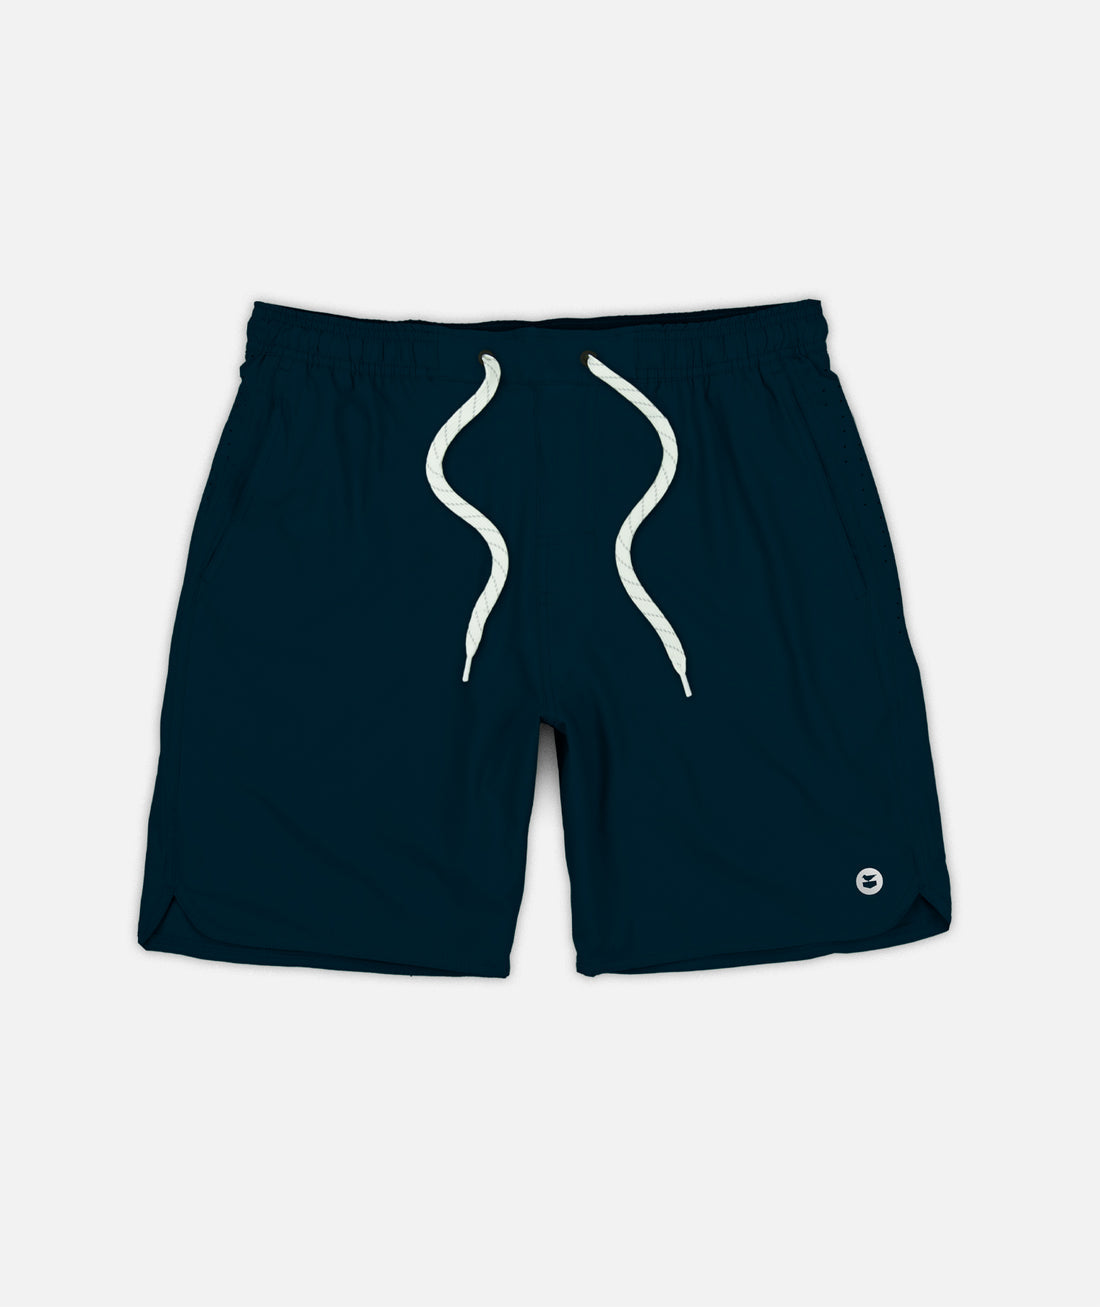 Jetty Men's Coaster Active Short Apparel Jetty Carbon Small 